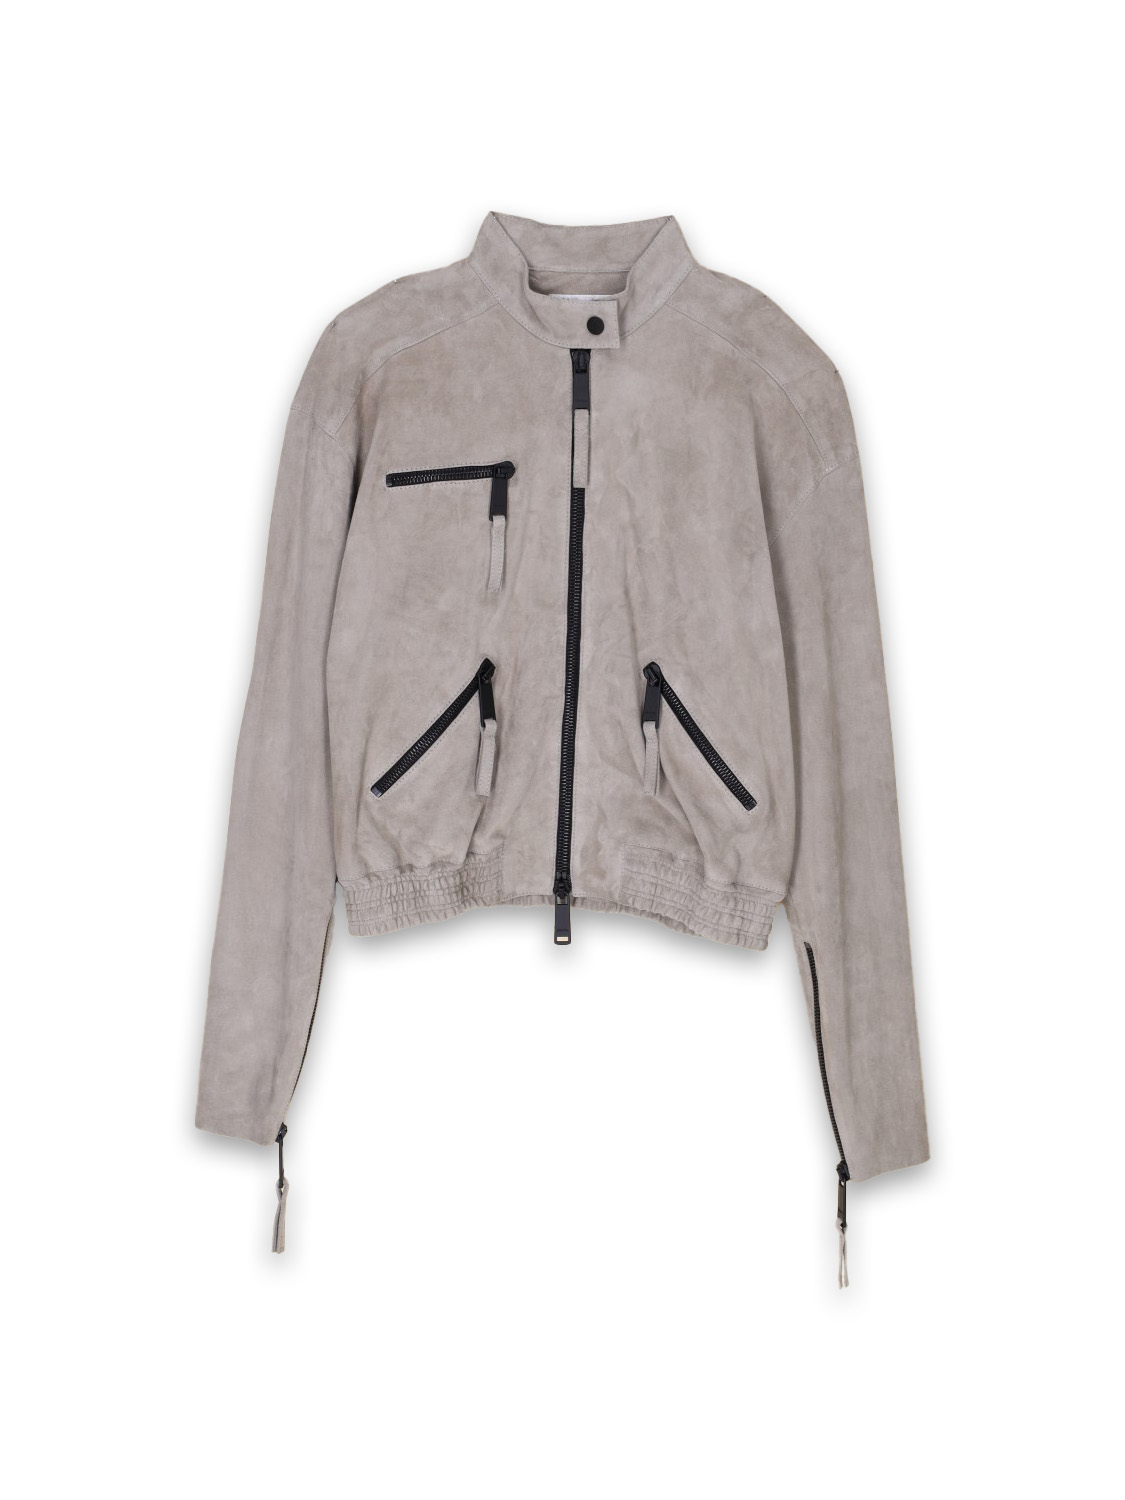 Blof - Stretchy suede jacket with black zip-details 